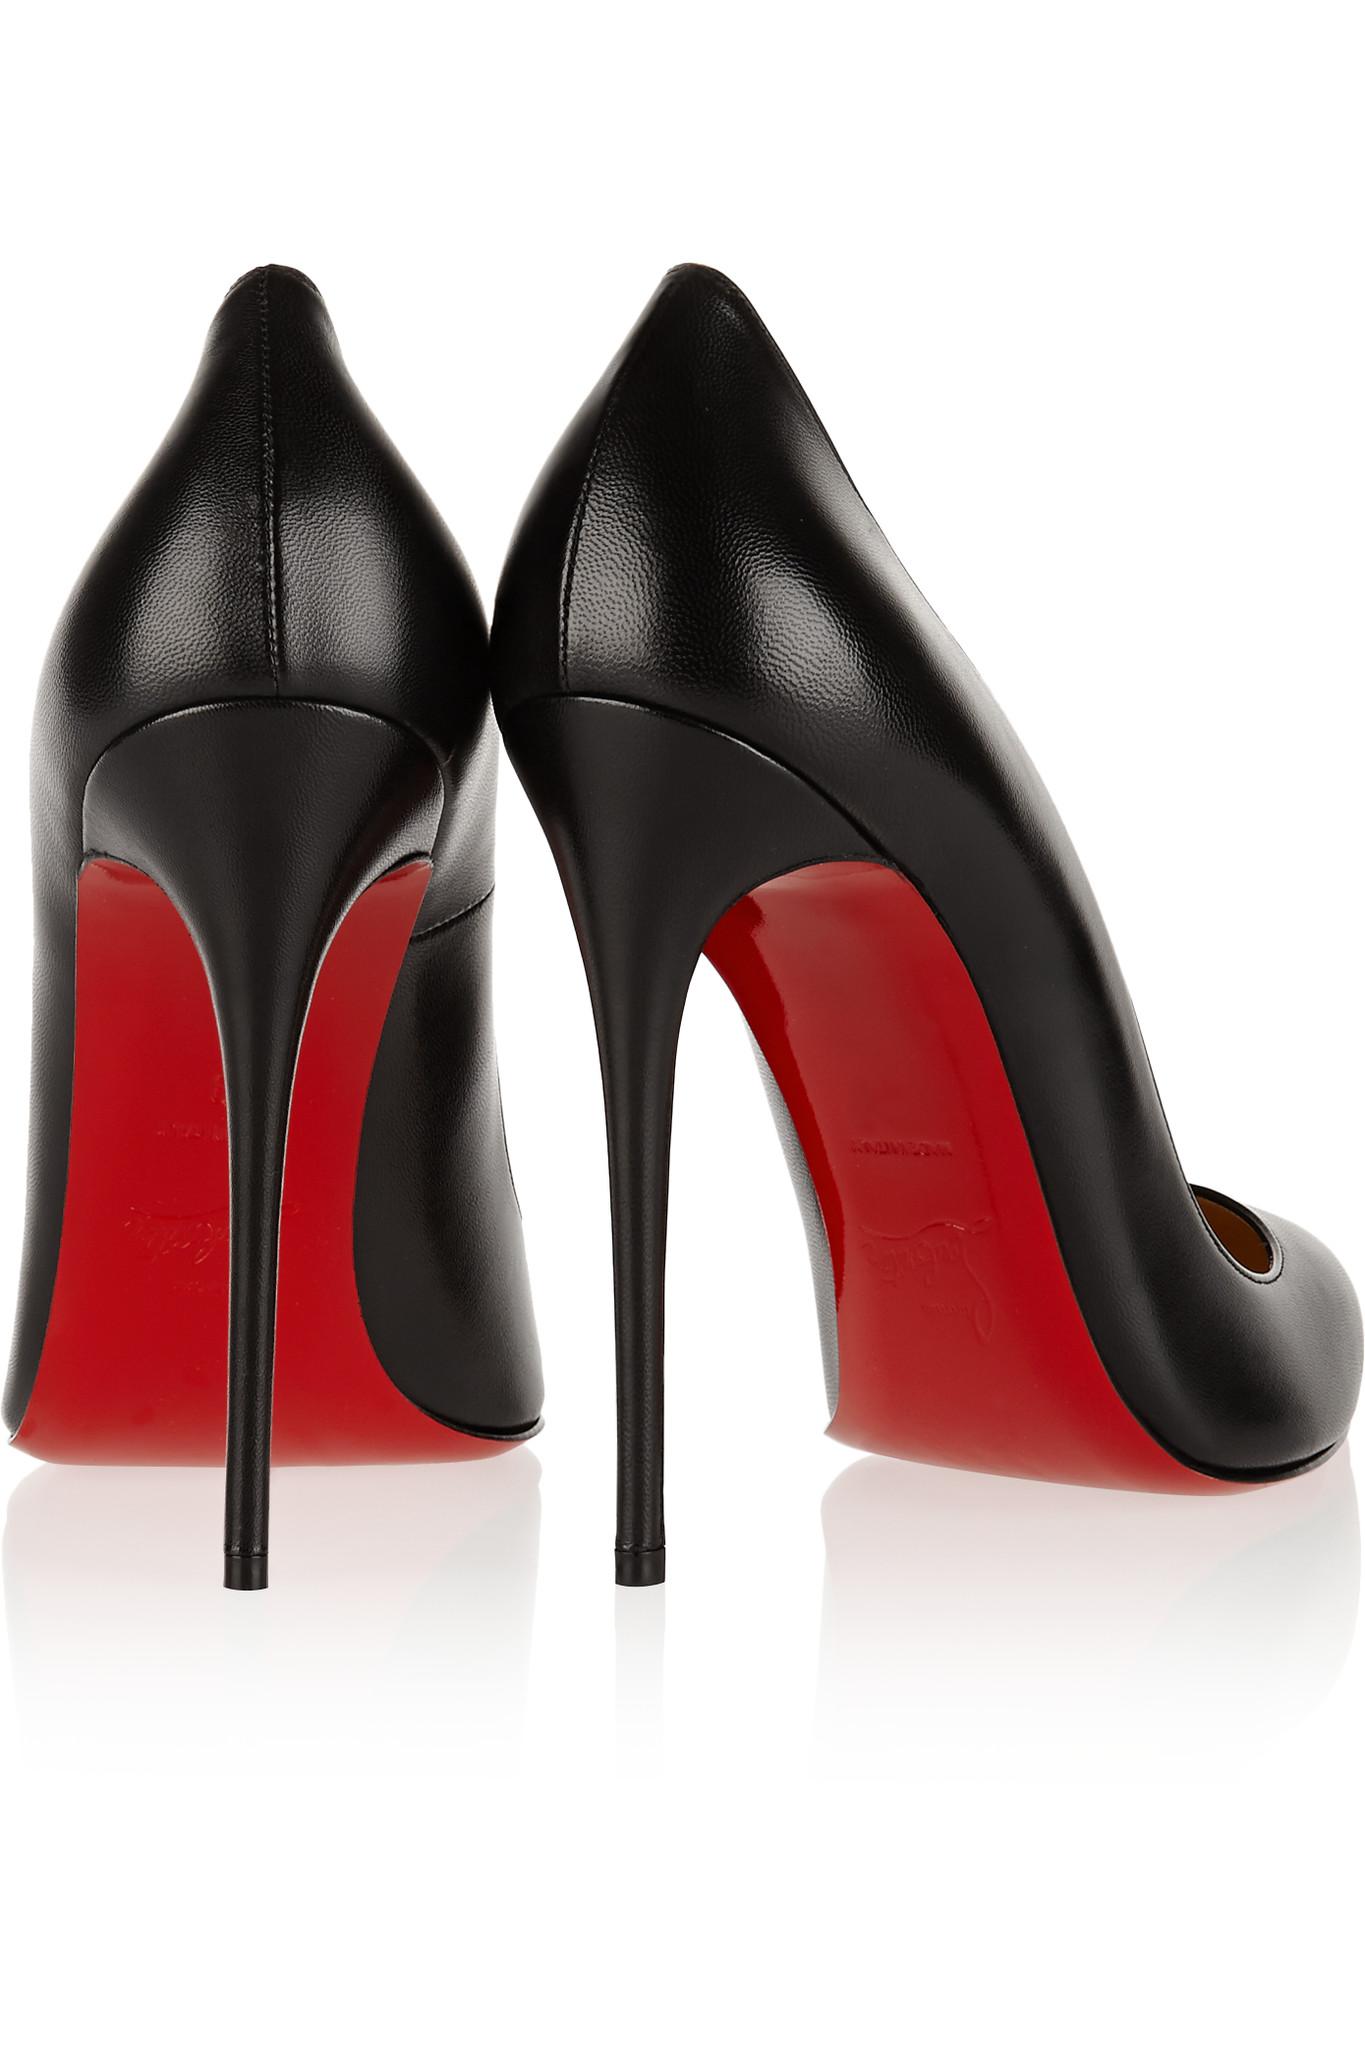 Christian Louboutin Dorissima Leather Pumps in Black - Lyst